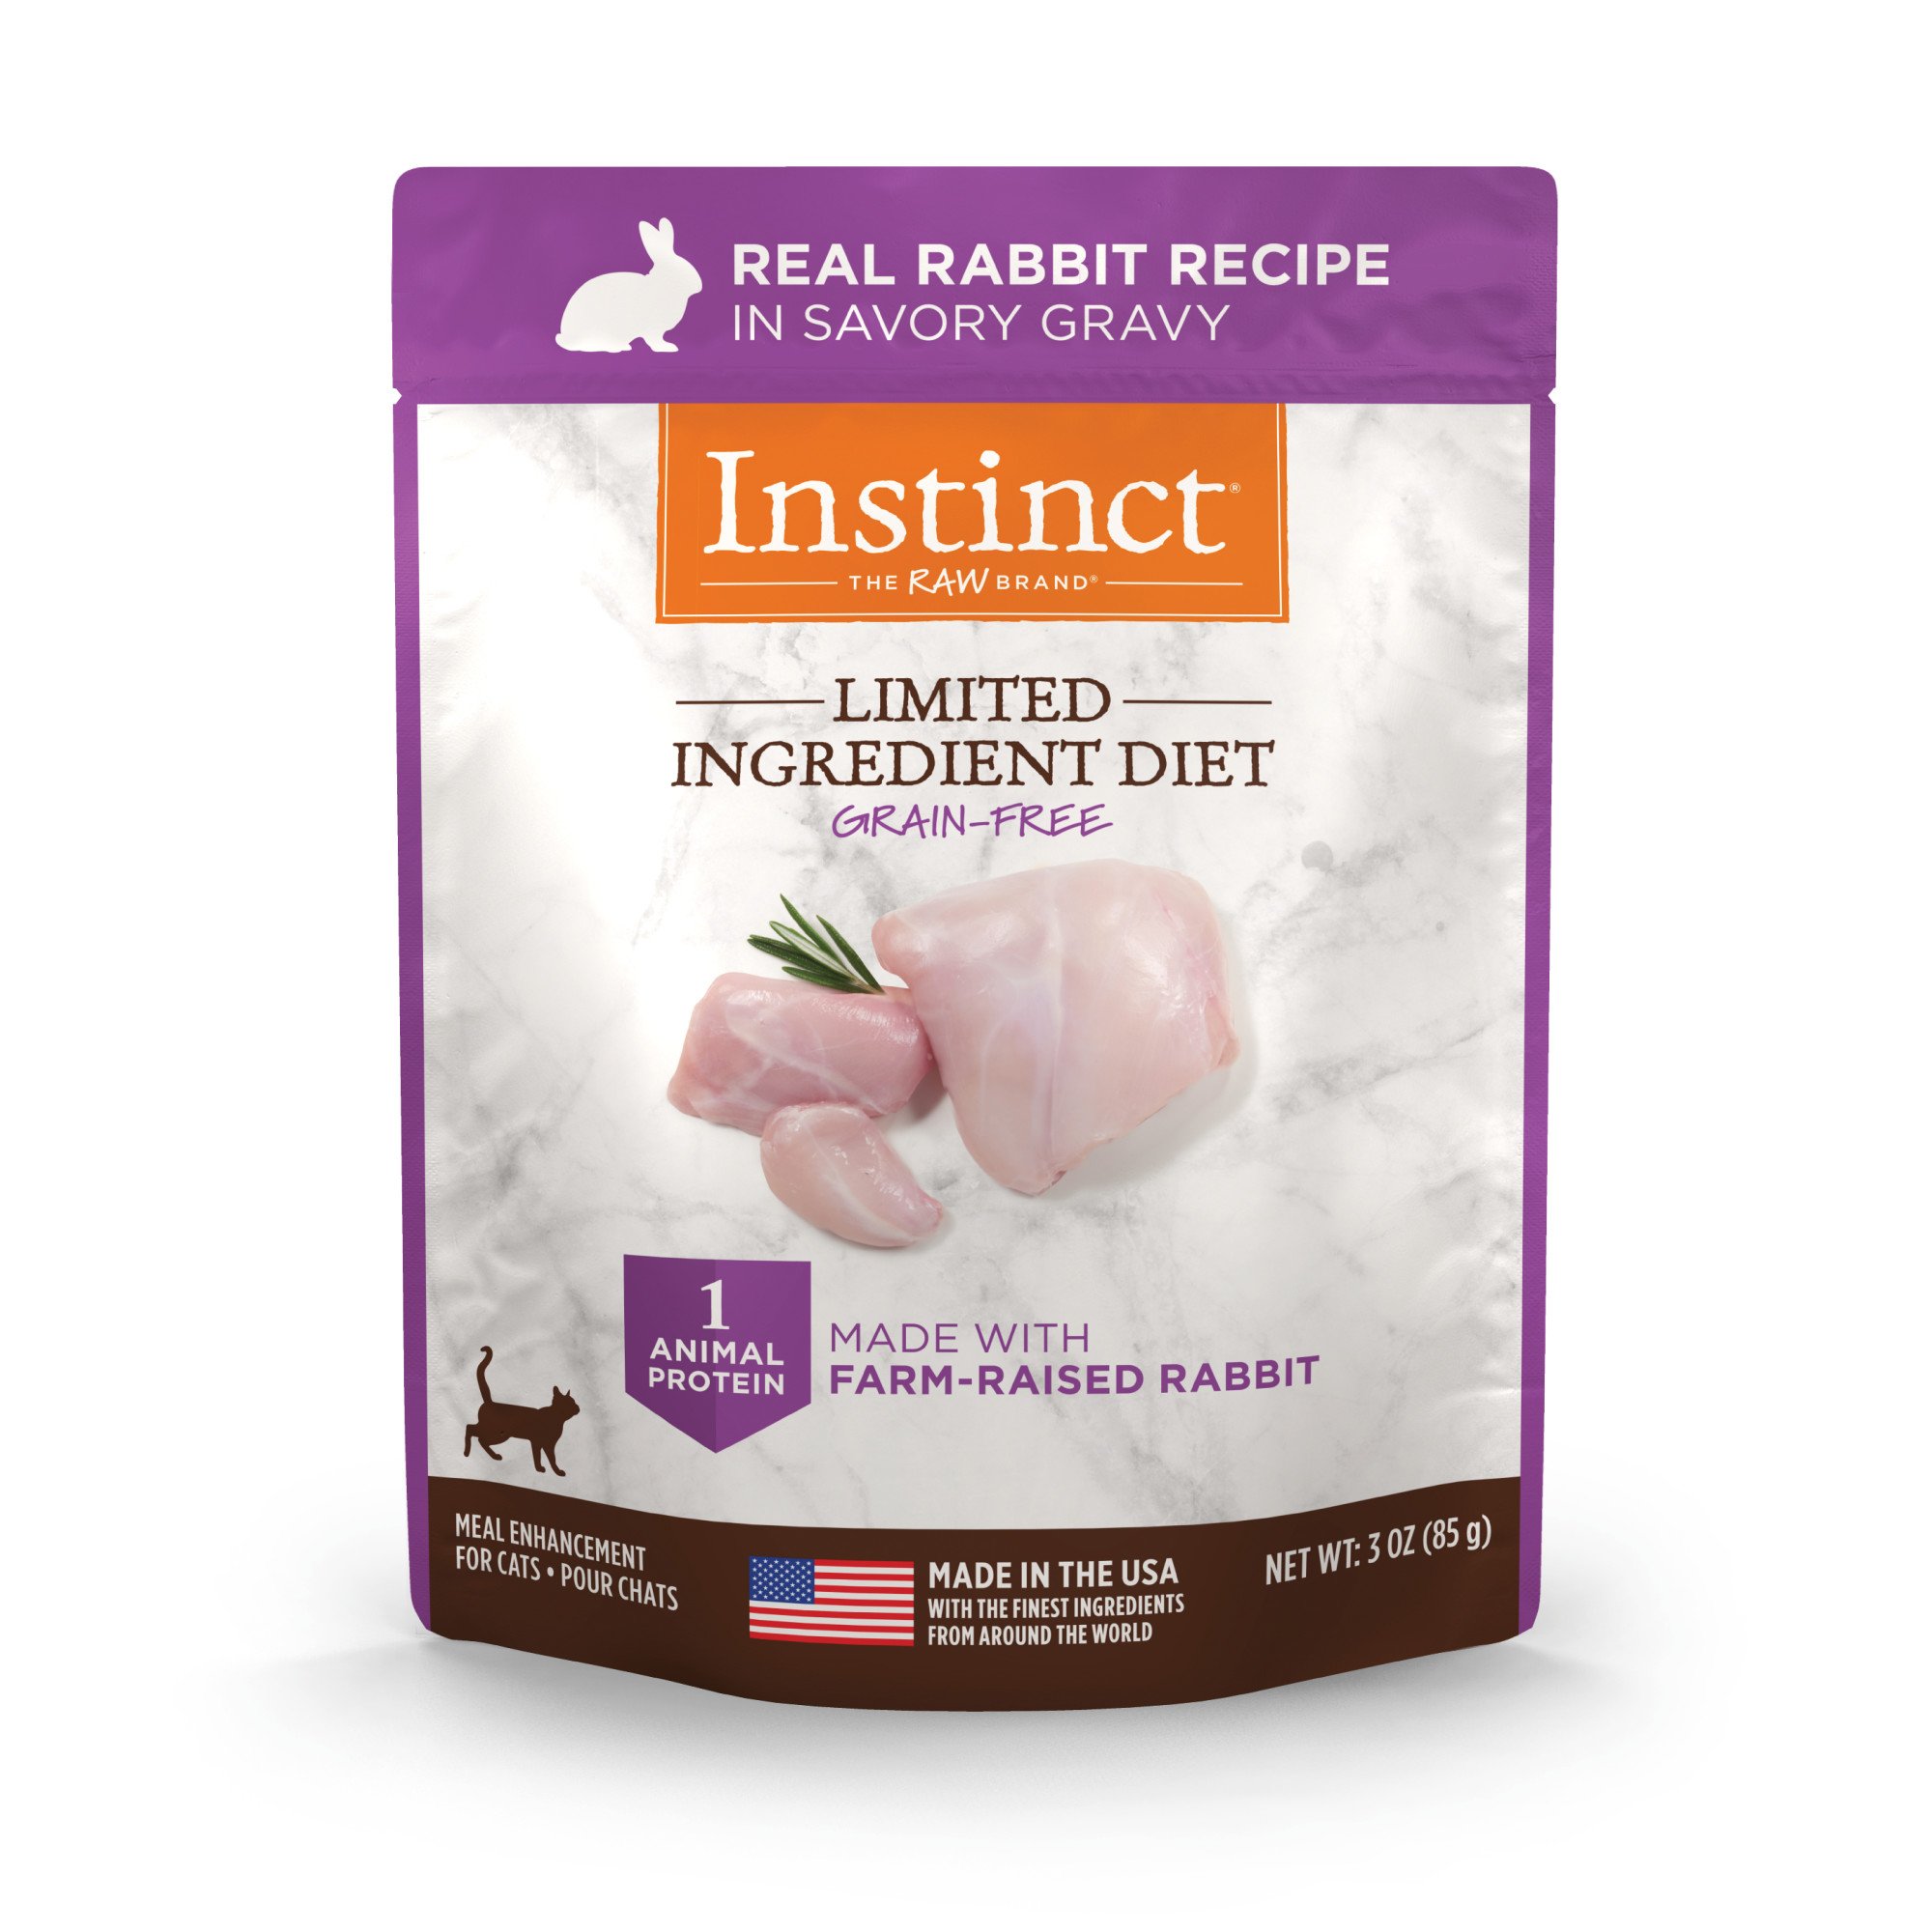 Instinct GrainFree Rabbit Canned Cat Food by Nature's Variety, 5.5 oz